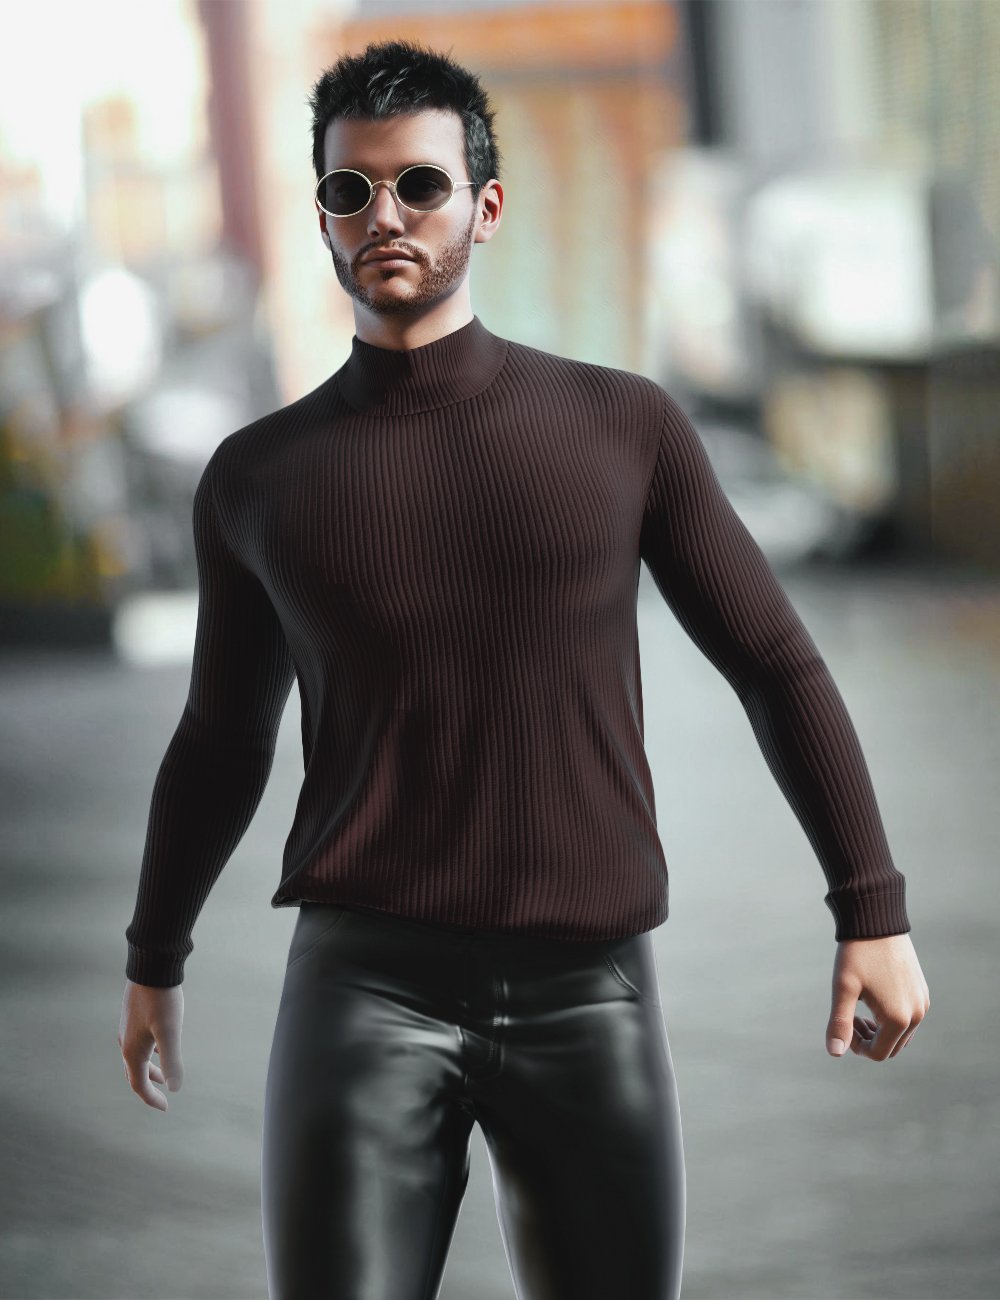 M Fashion Casual Outfit V1 Glasses for Genesis 8 and 8.1 Male by: fjaa3d, 3D Models by Daz 3D